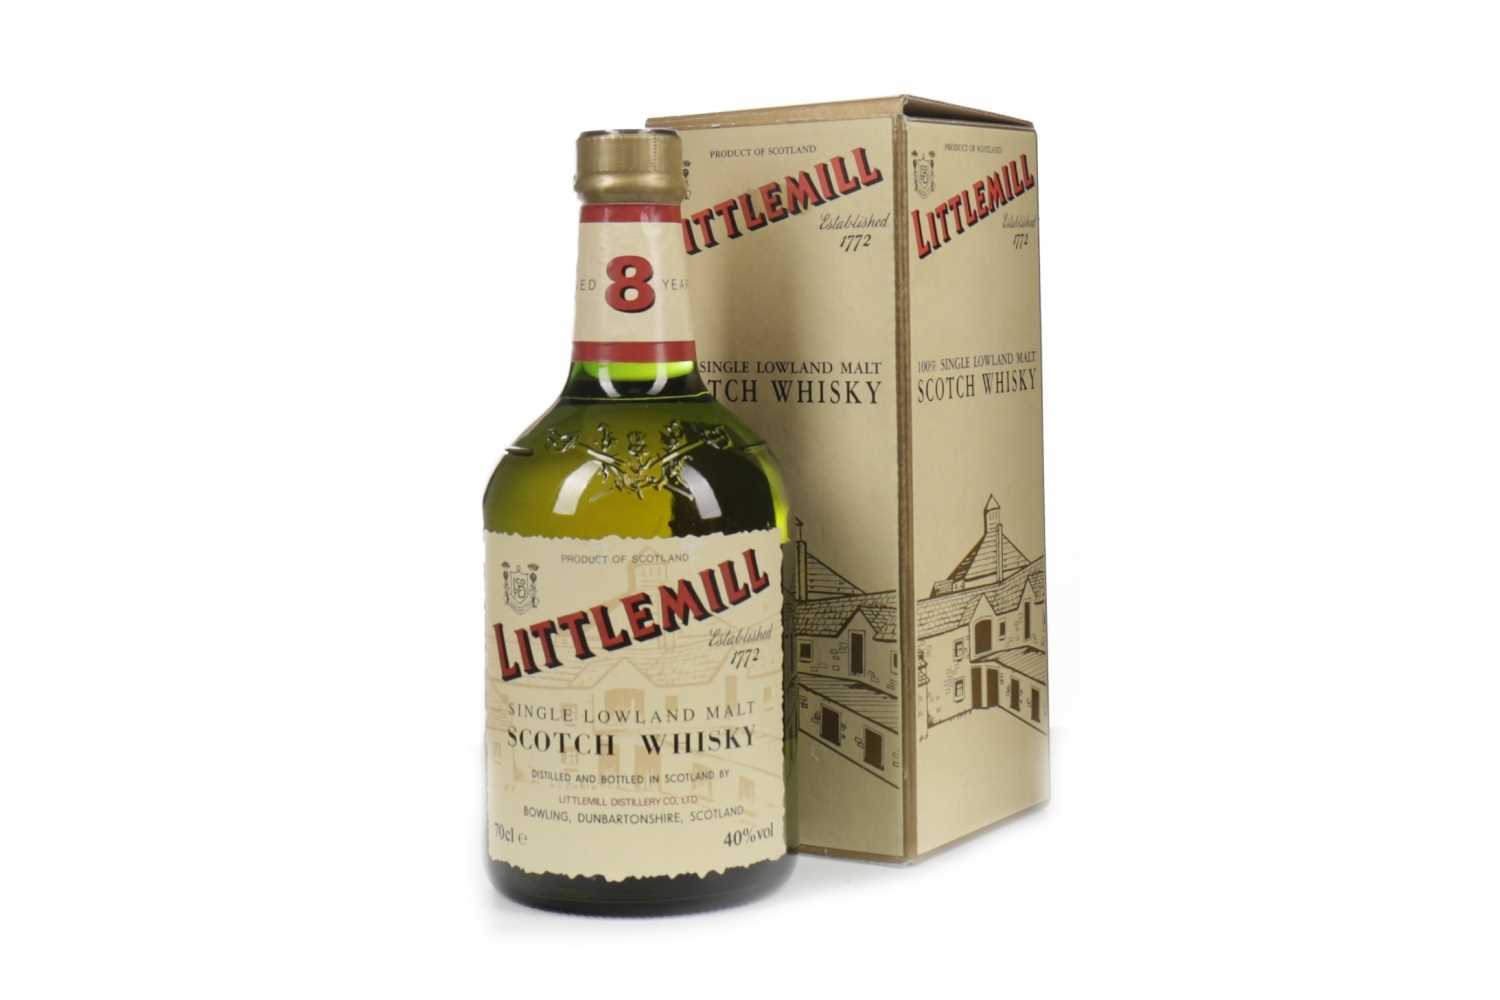 Lot 77 - LITTLEMILL AGED 8 YEARS